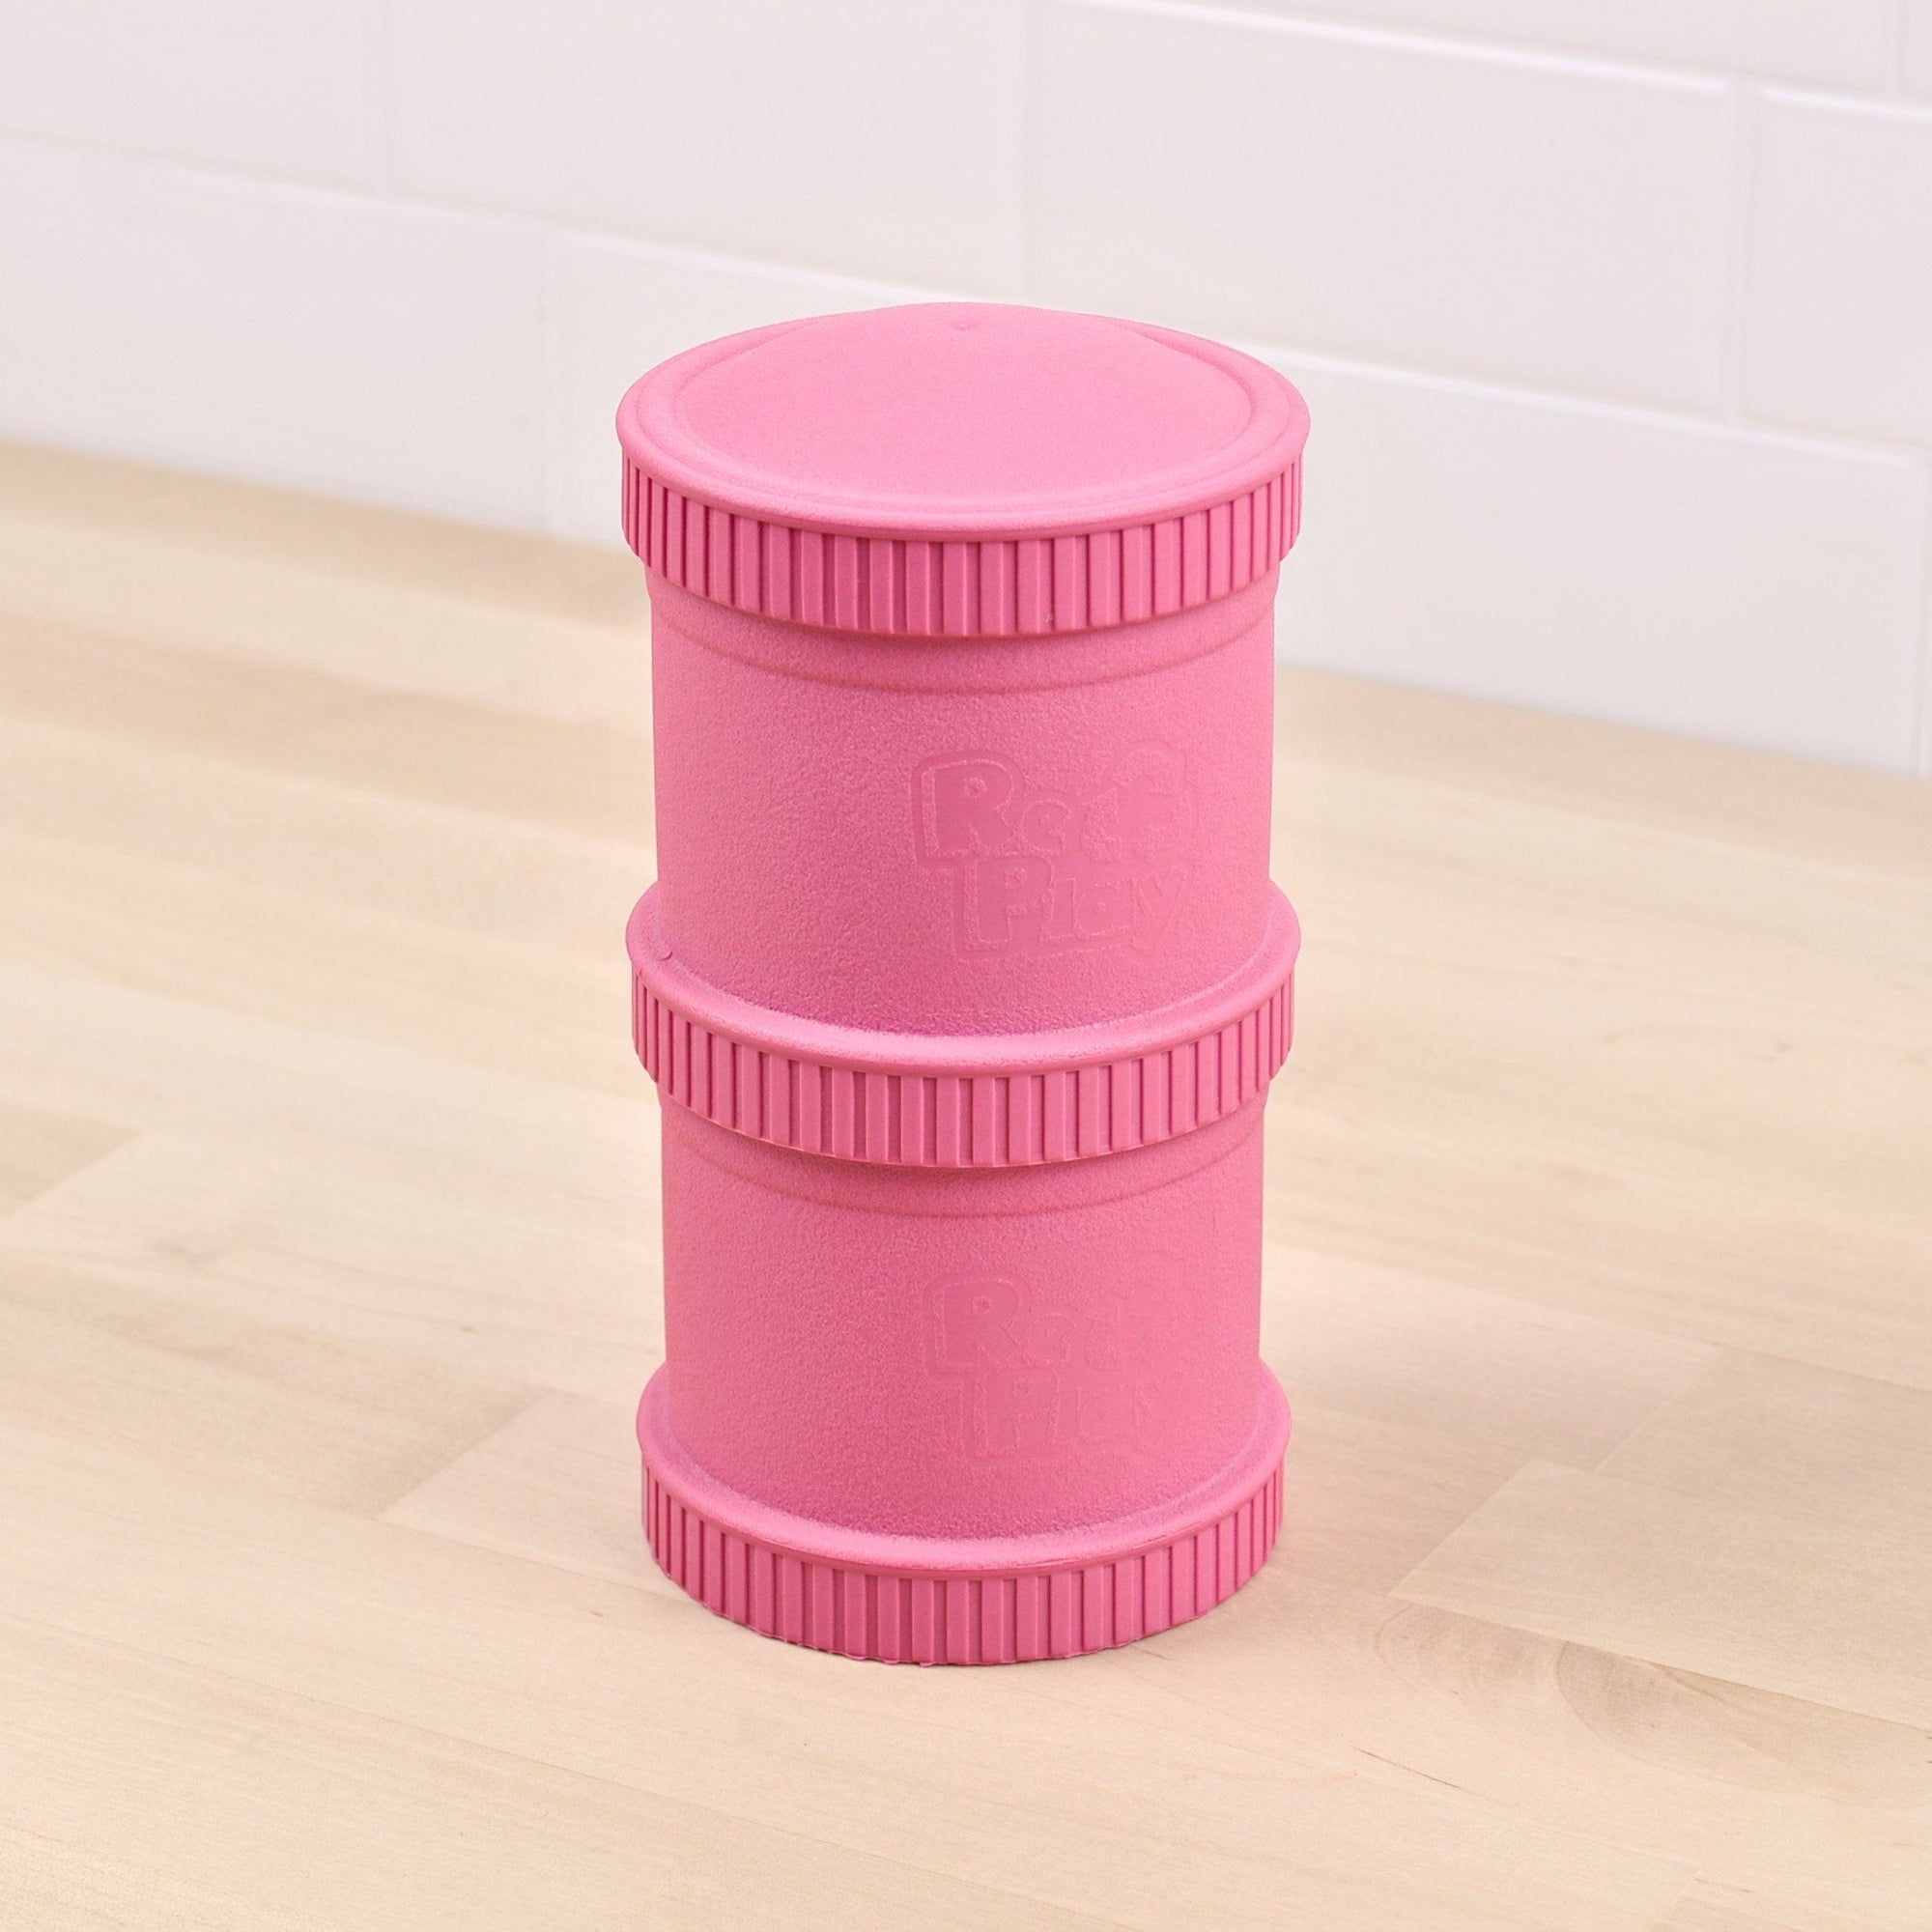 Snack Stack (Bright Pink)